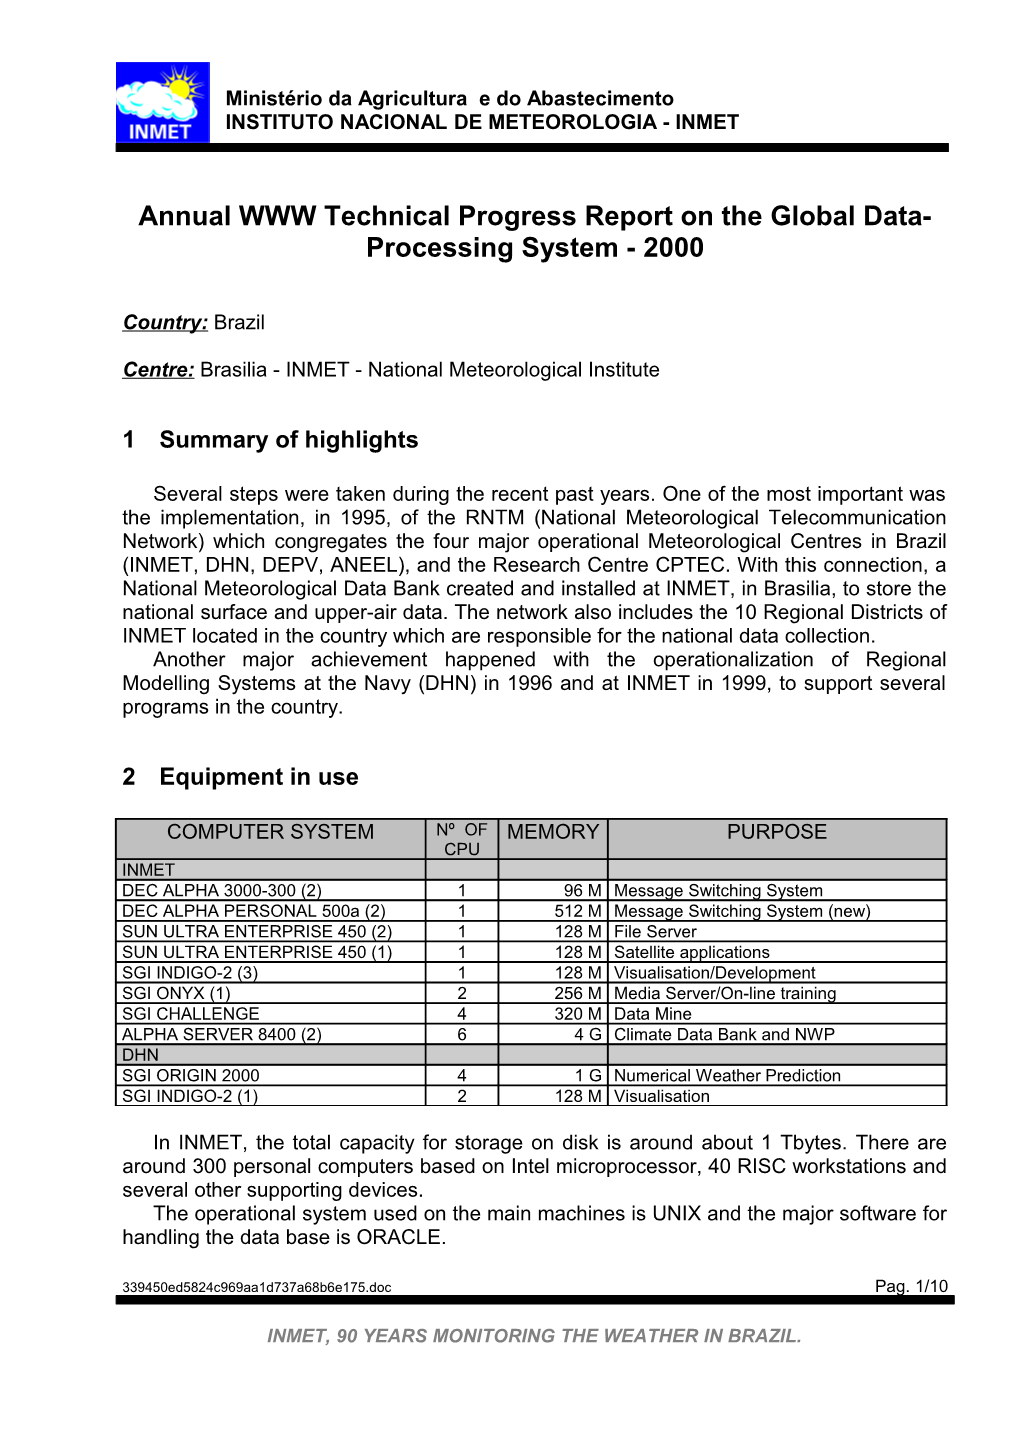 Annual WWW Technical Progress Report on the Global Data-Processing System - 2000